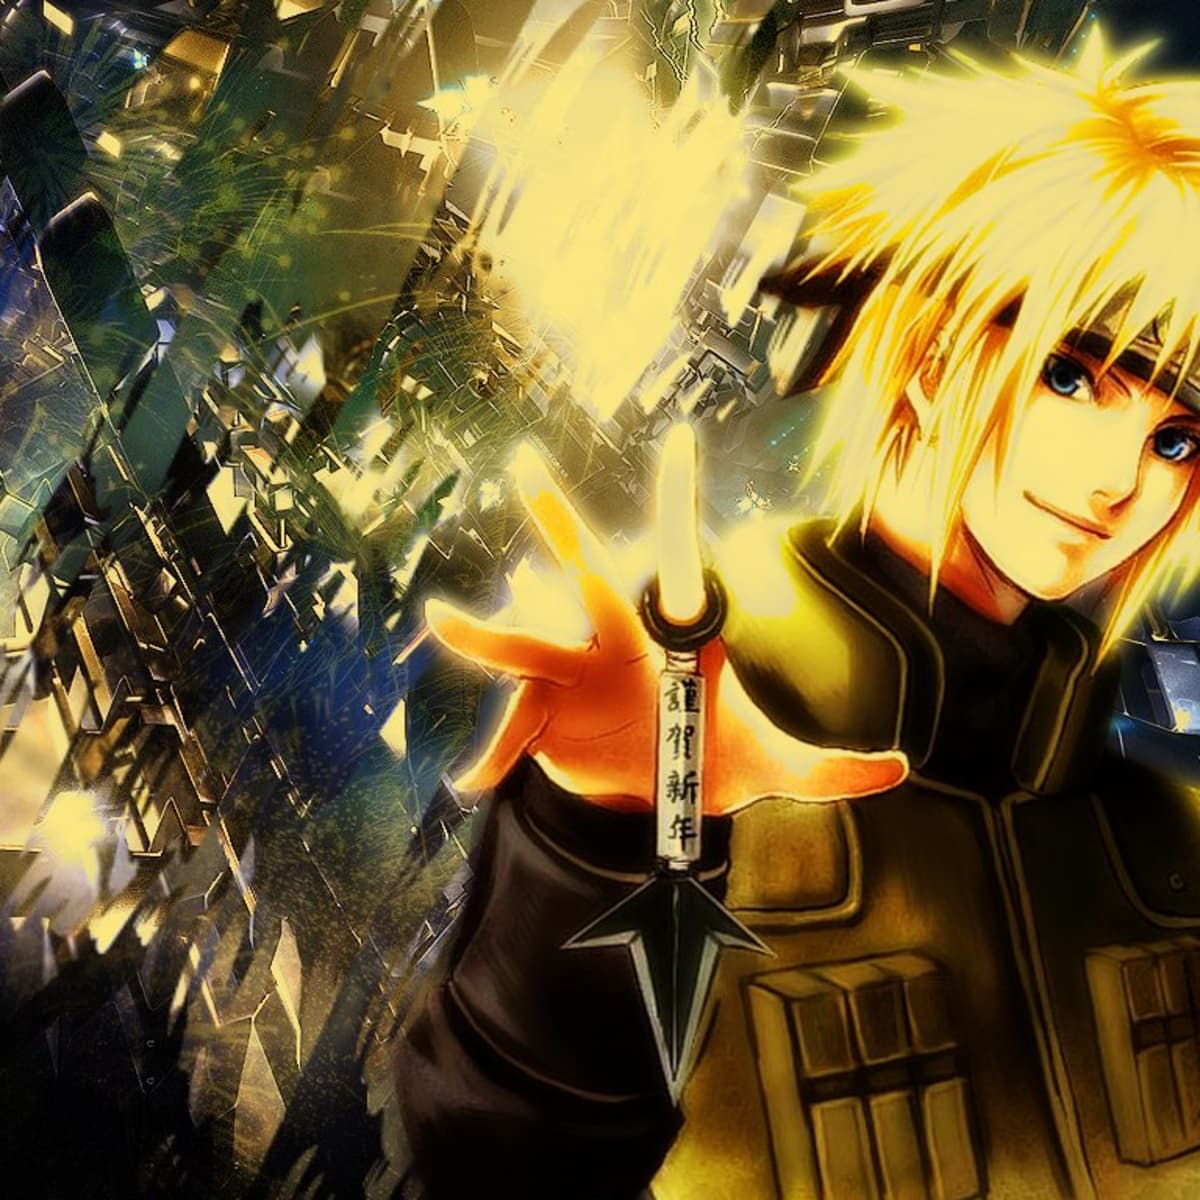 5 things Naruto will never get over from Minato Namikaze 